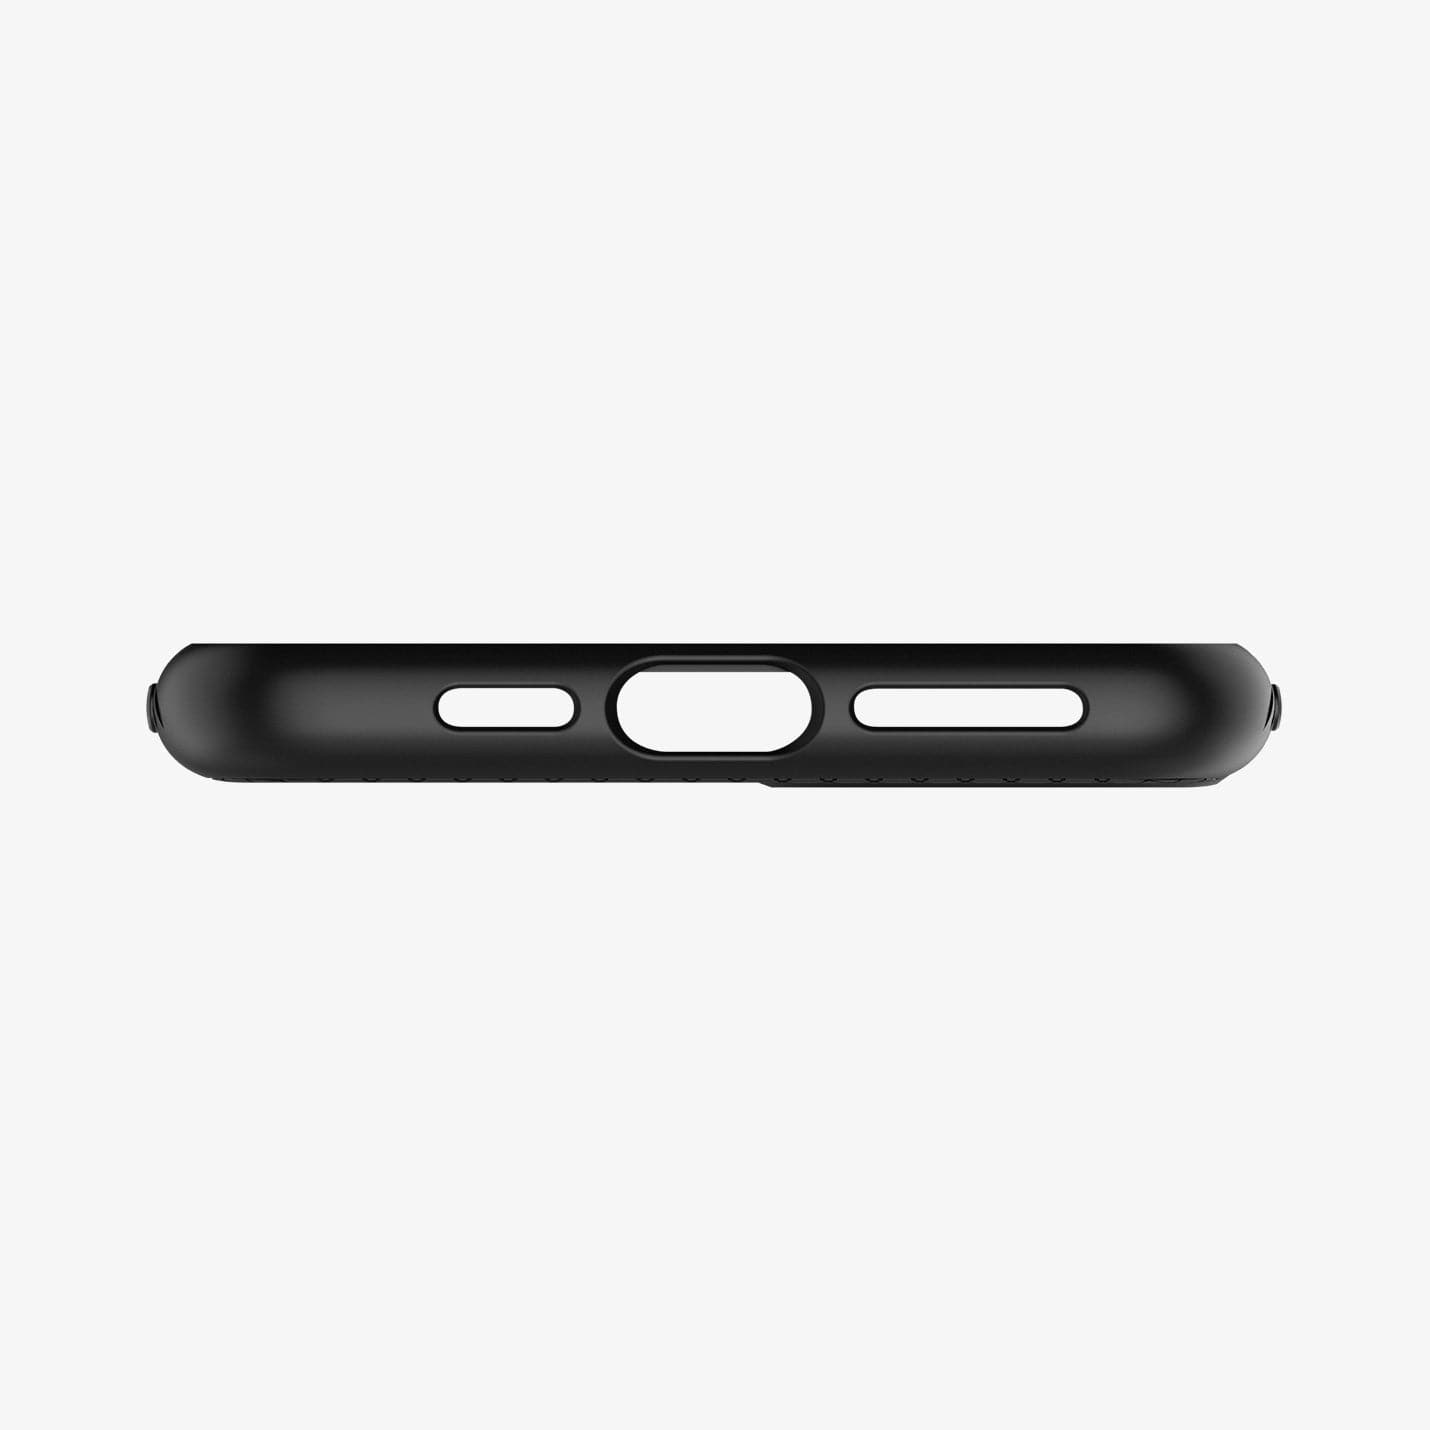 075CS27134 - iPhone 11 Pro Max Case Liquid Air in matte black showing the bottom with precise cutouts